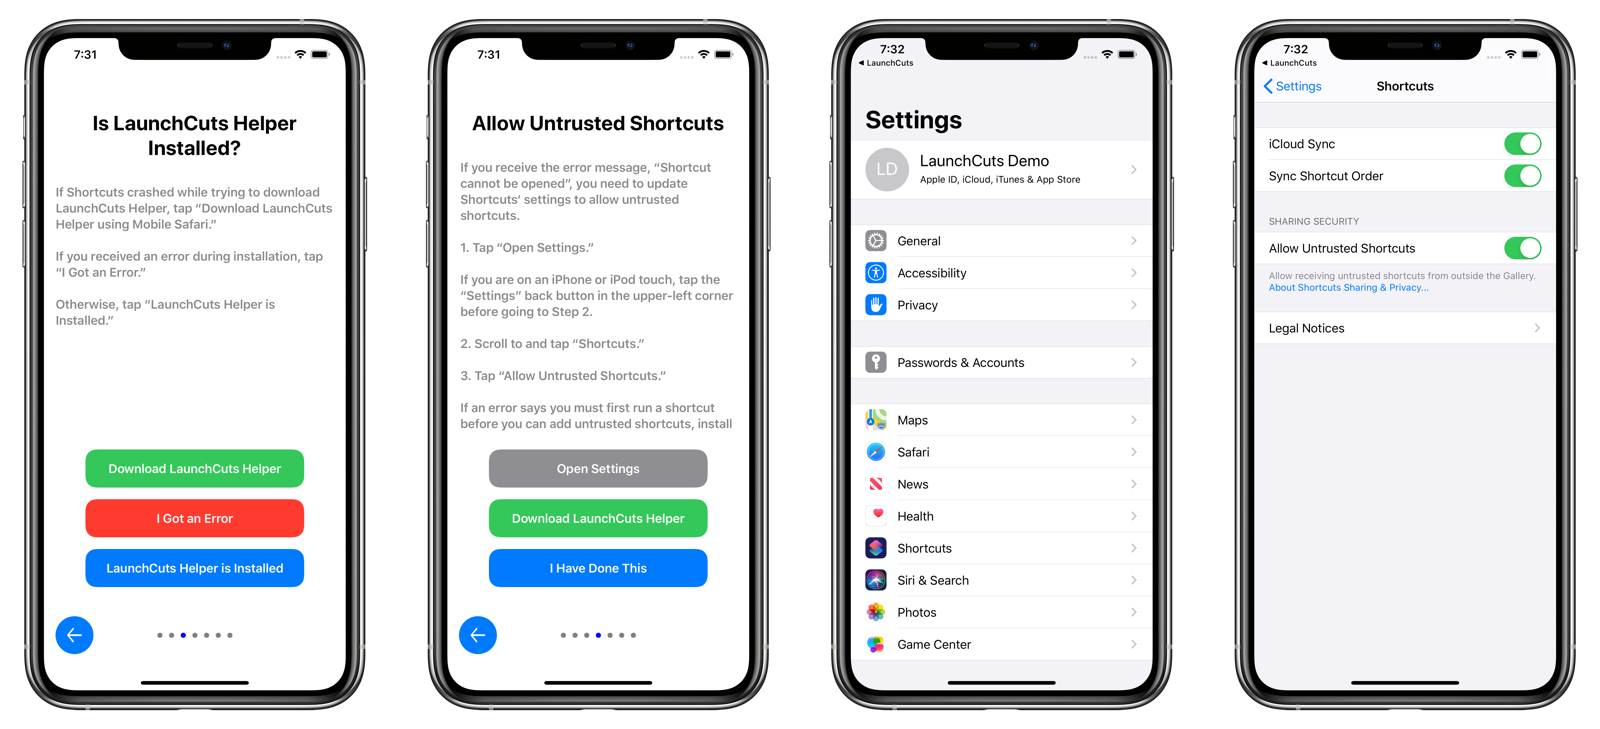 Allowing Untrusted Shortcuts